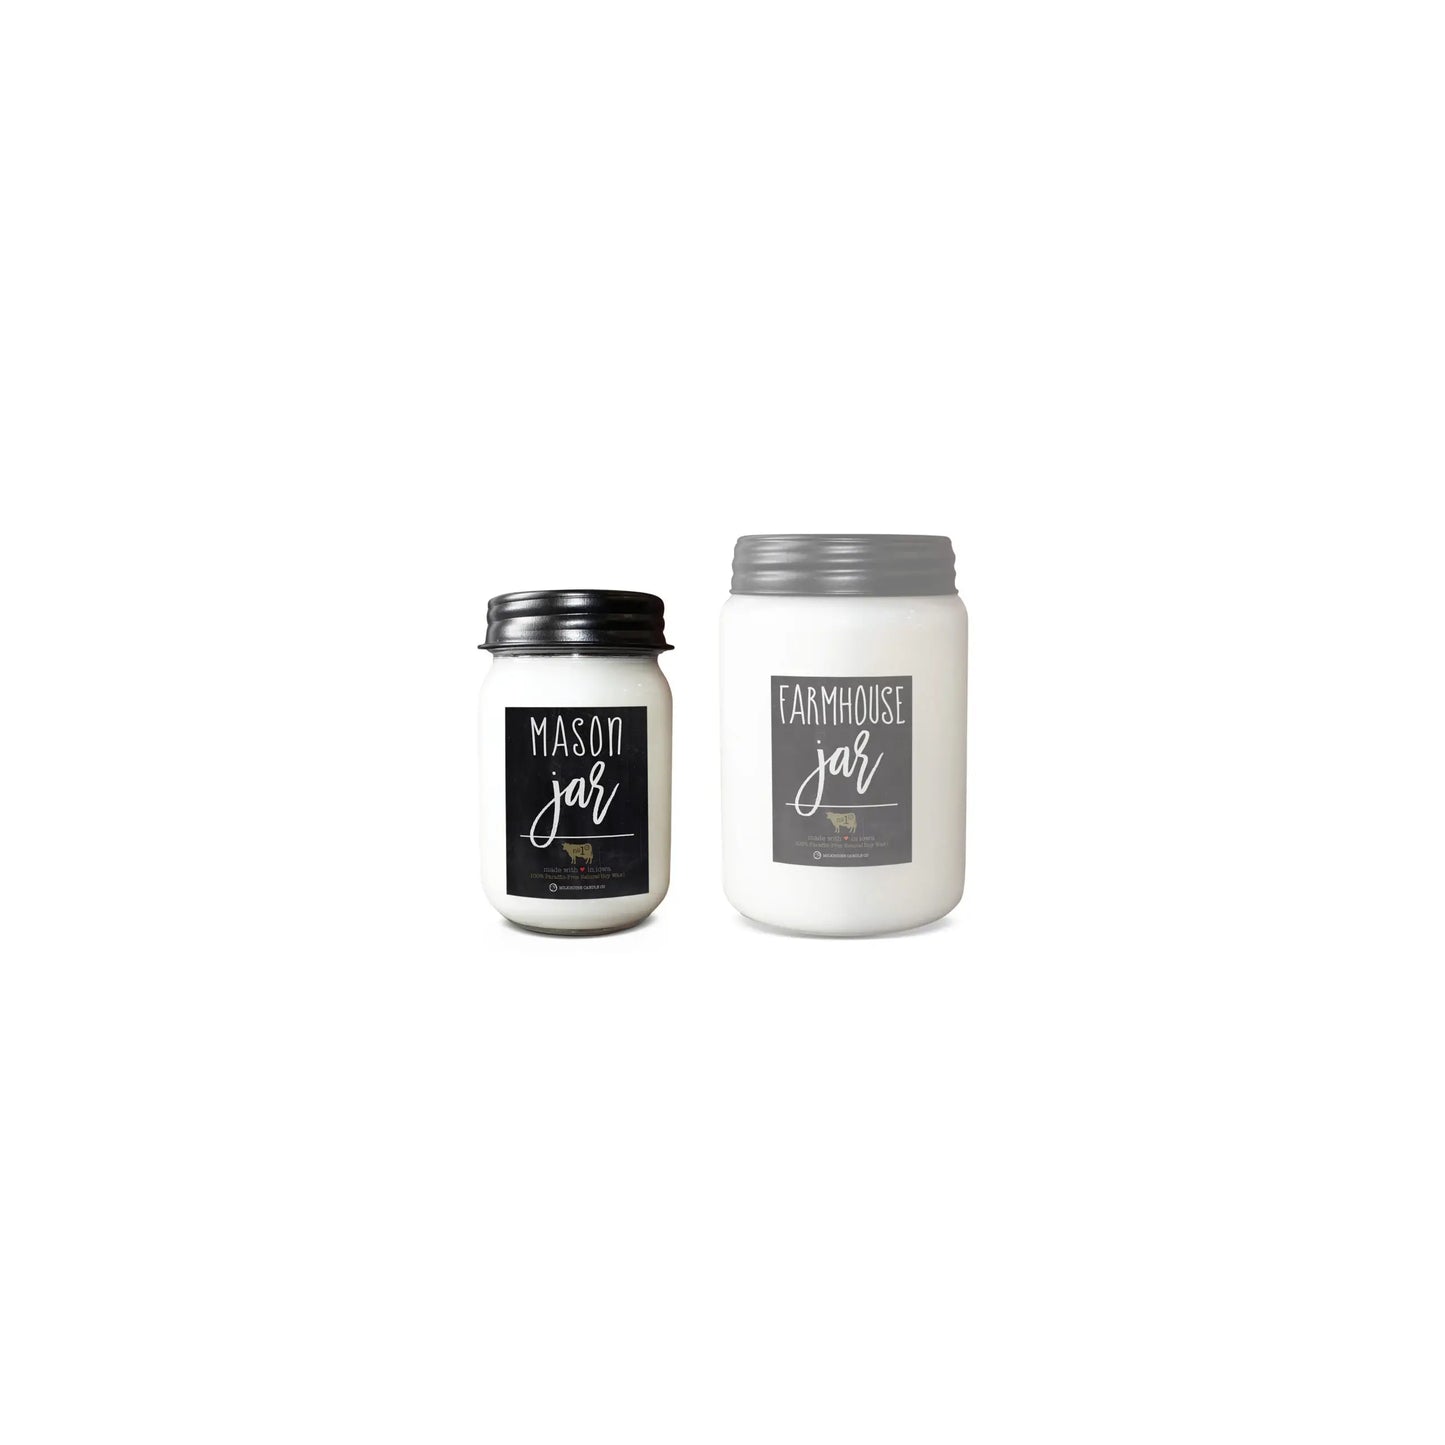 Milkhouse Candle Co. First Snowfall